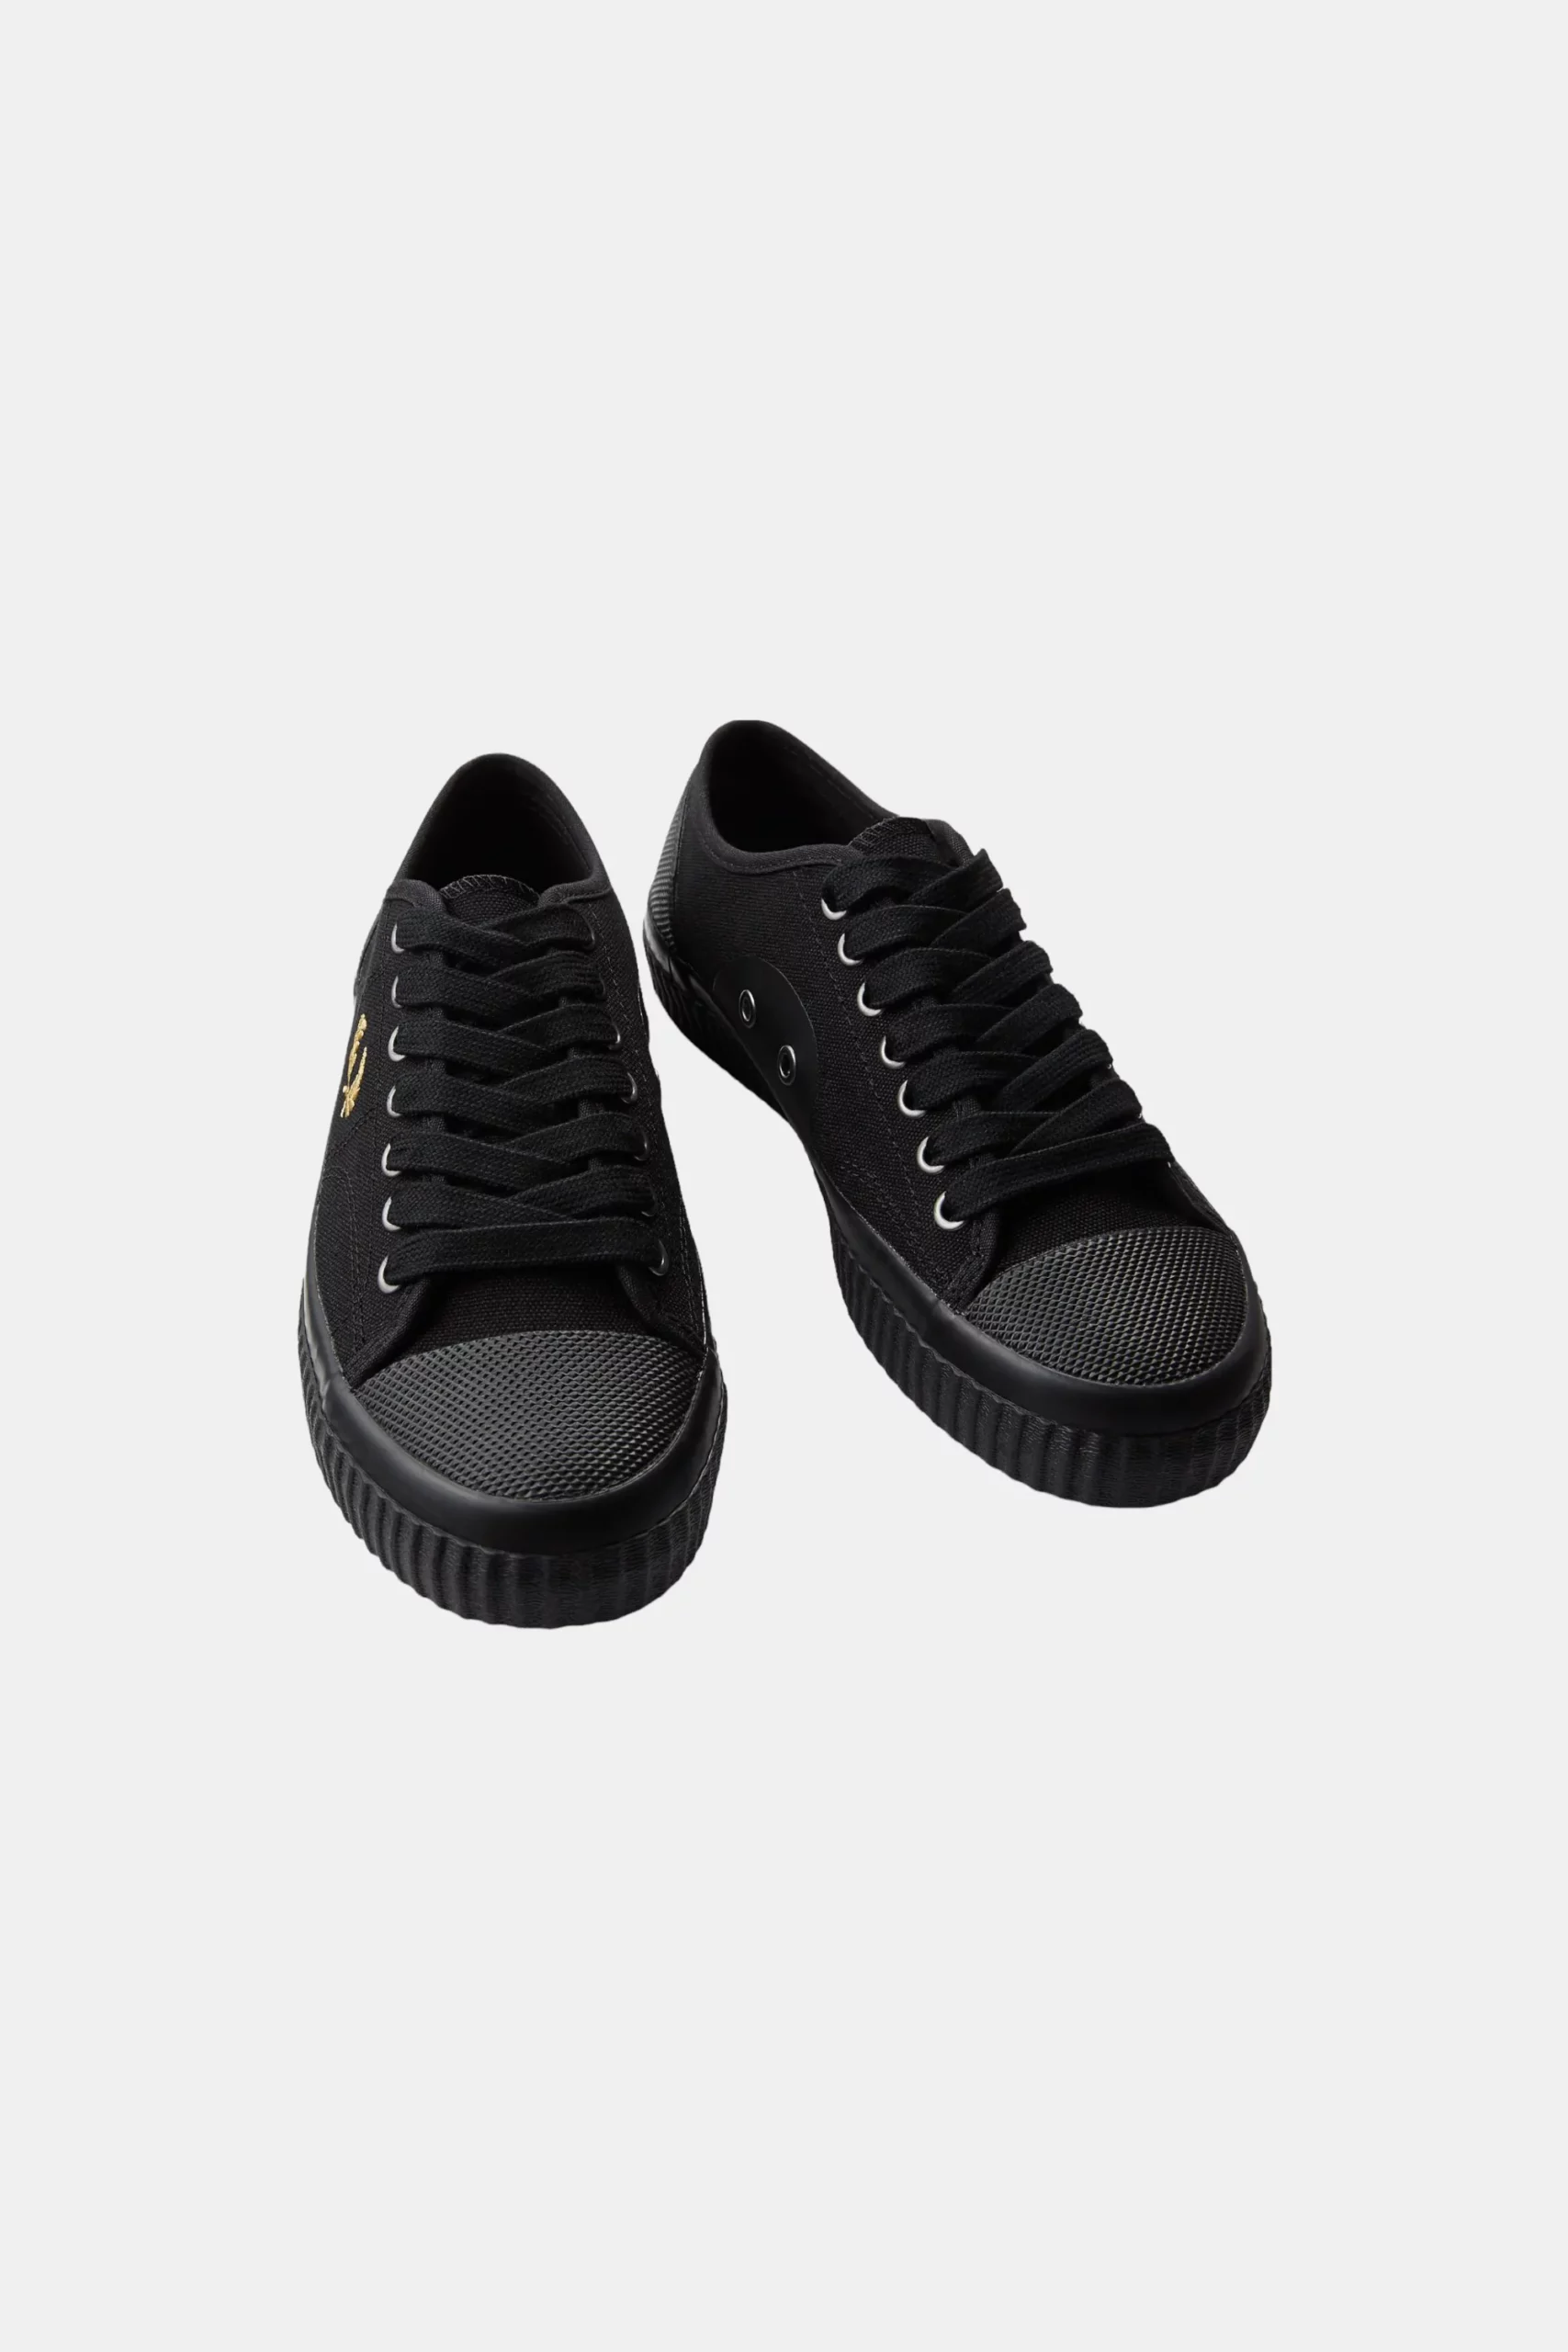 kedy fred perry hughes low canvas black 2